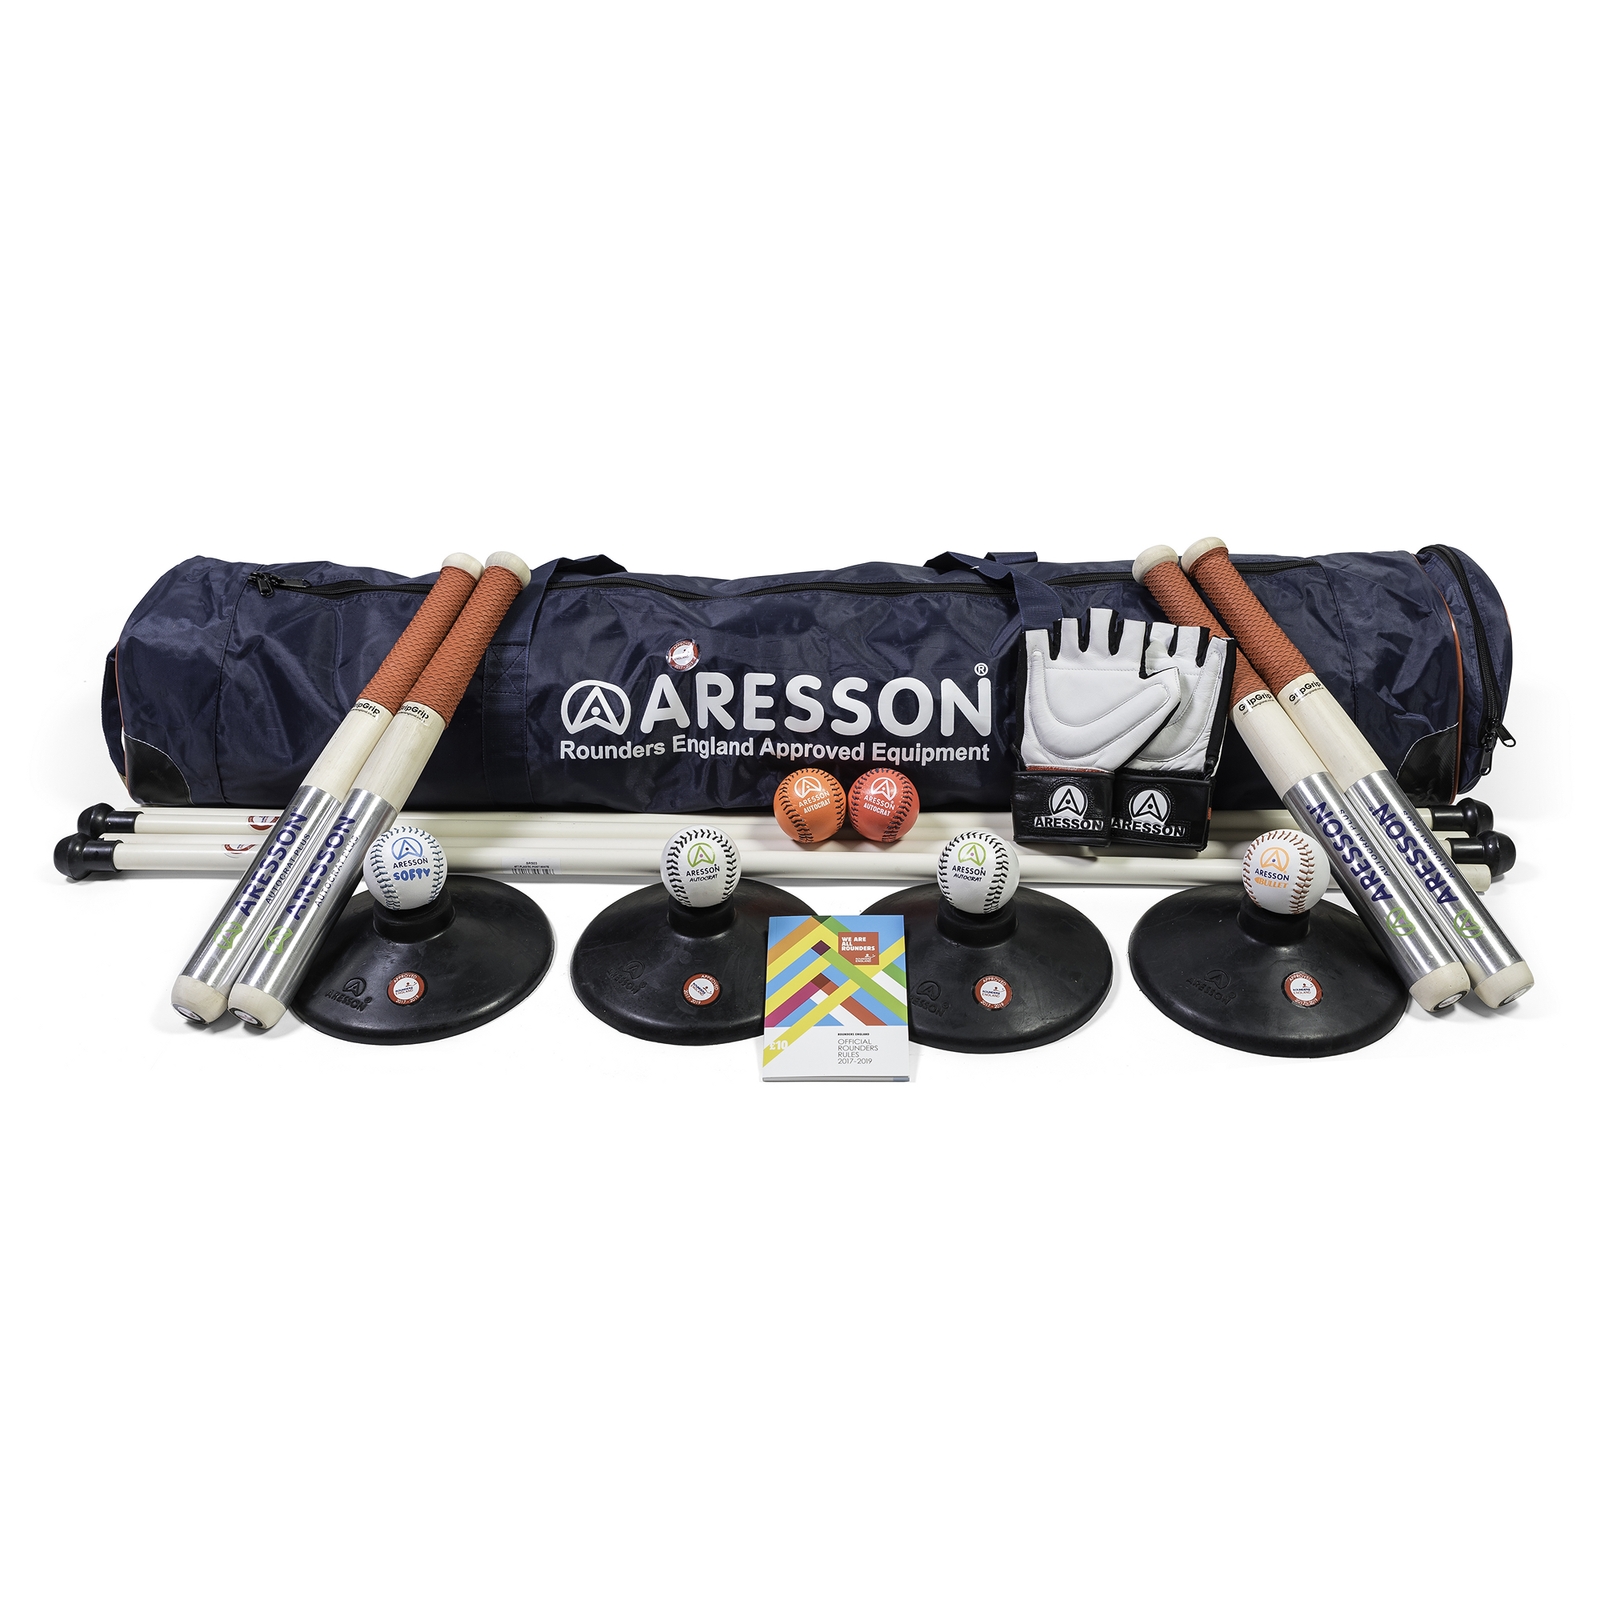 Aresson Club Rounders Set